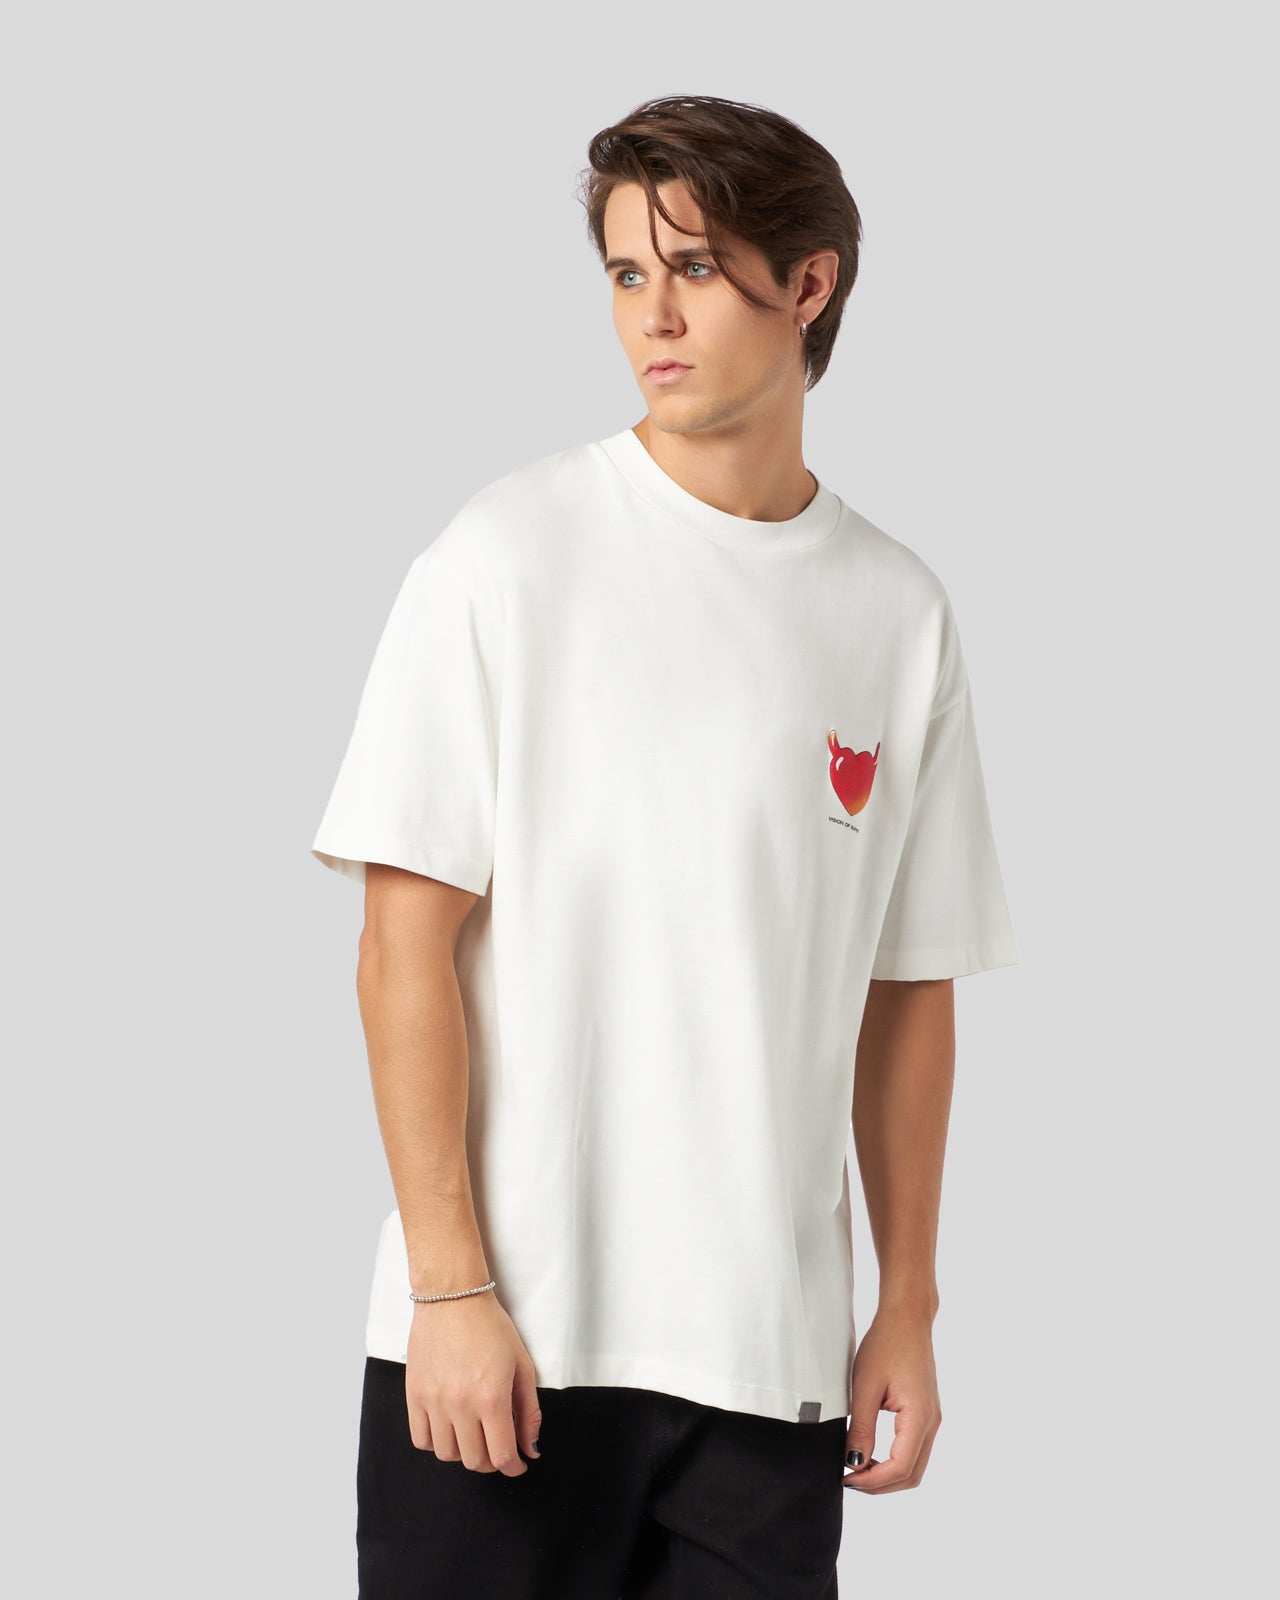 WHITE T-SHIRT WITH PUFFY LOVE PRINT